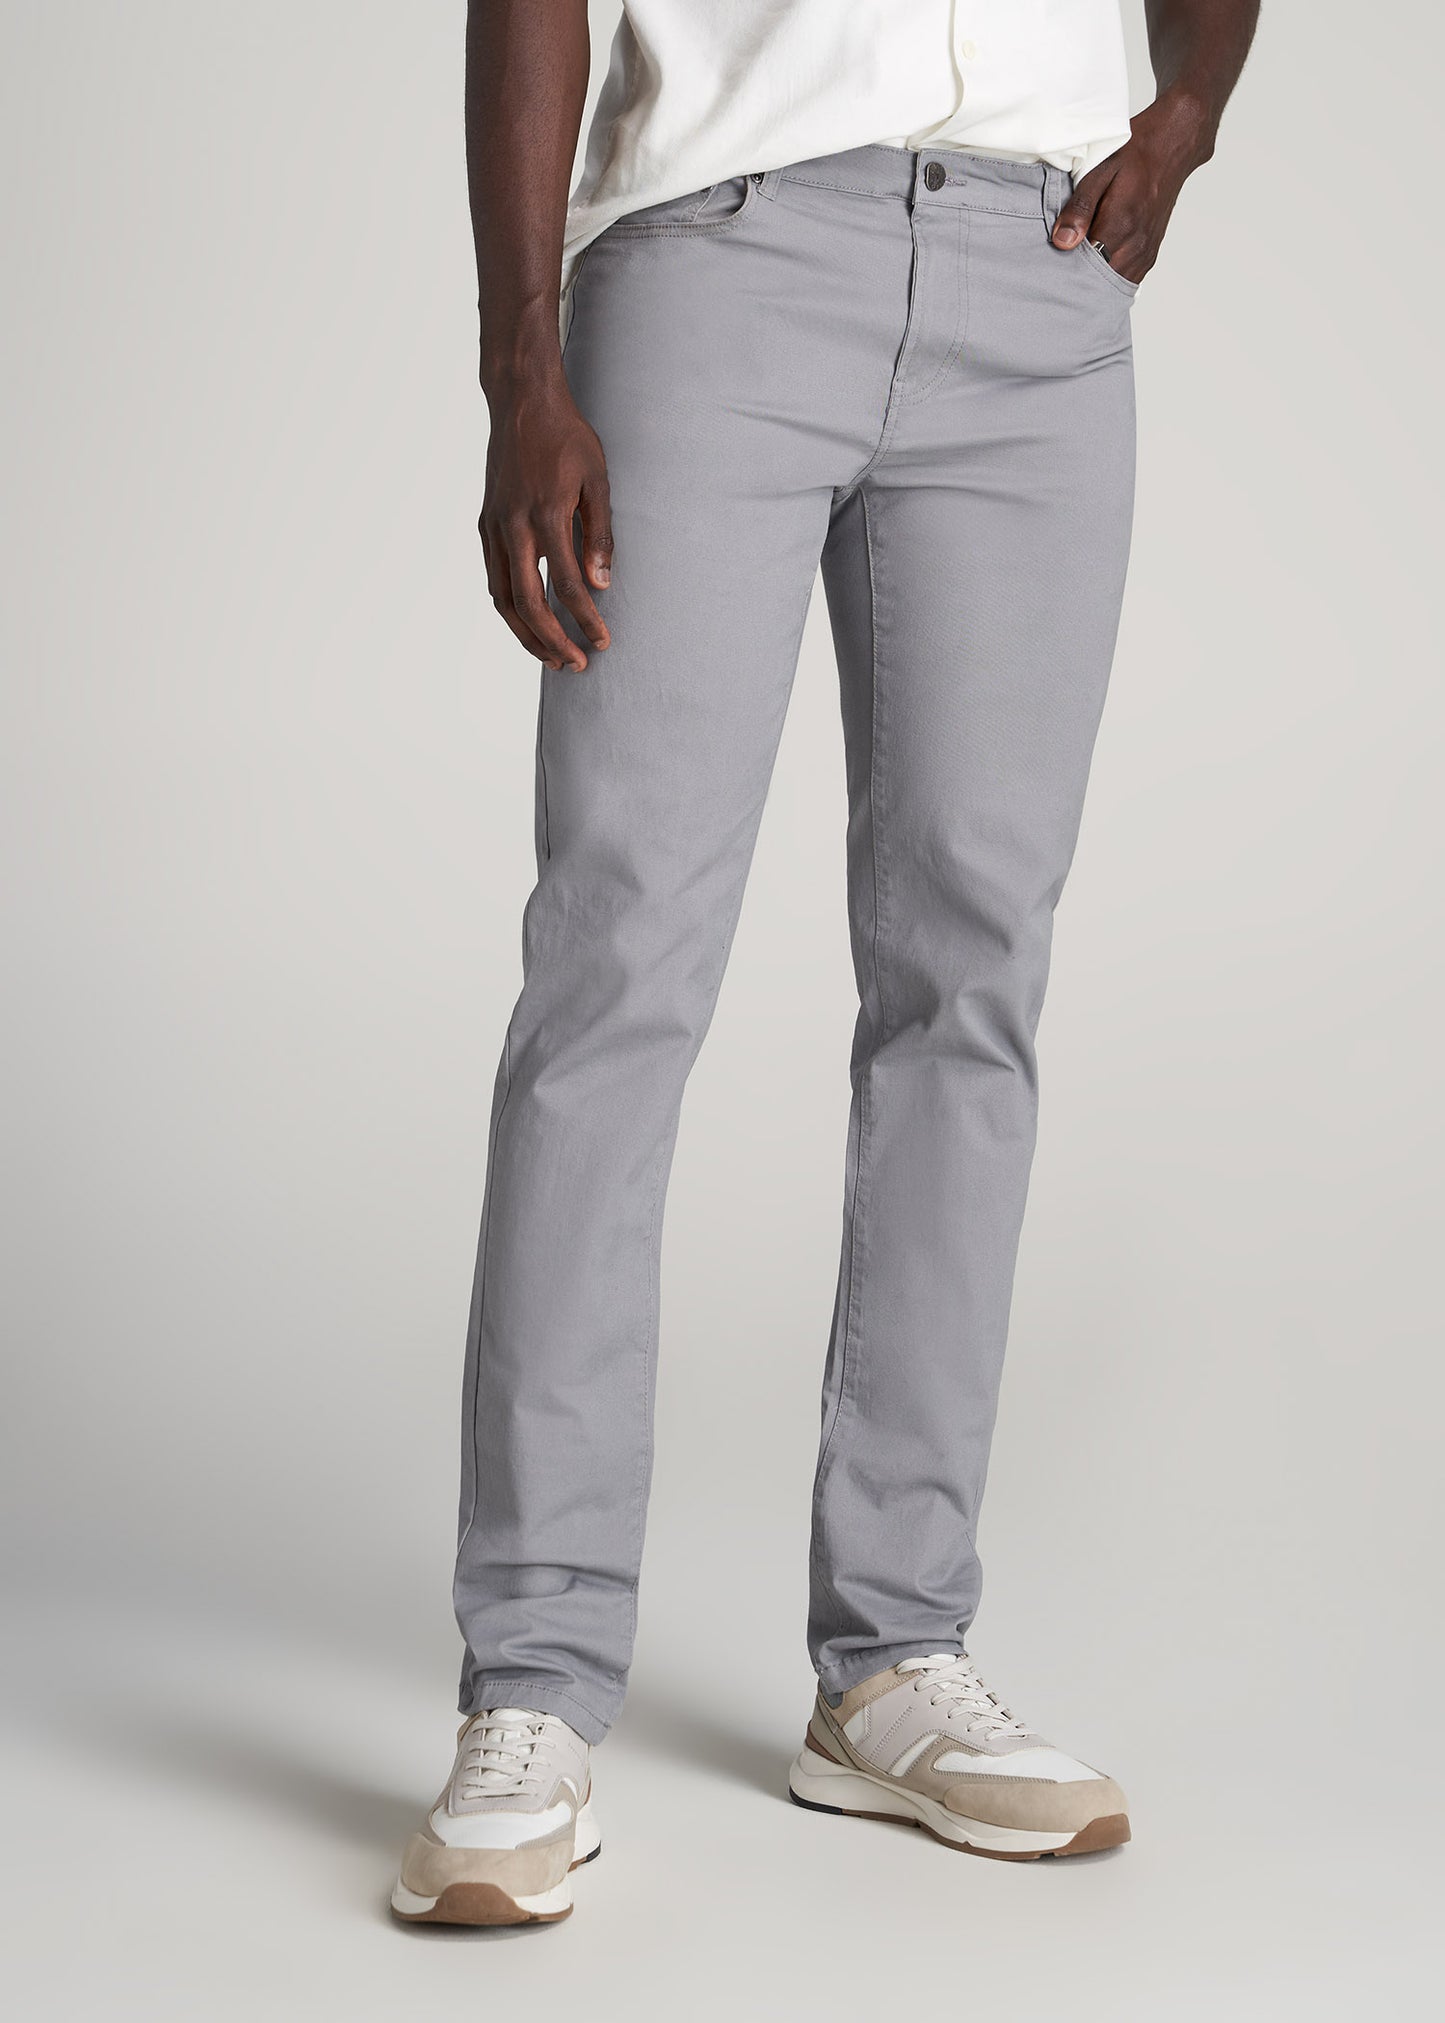 Athletic-Fit Travel Pant